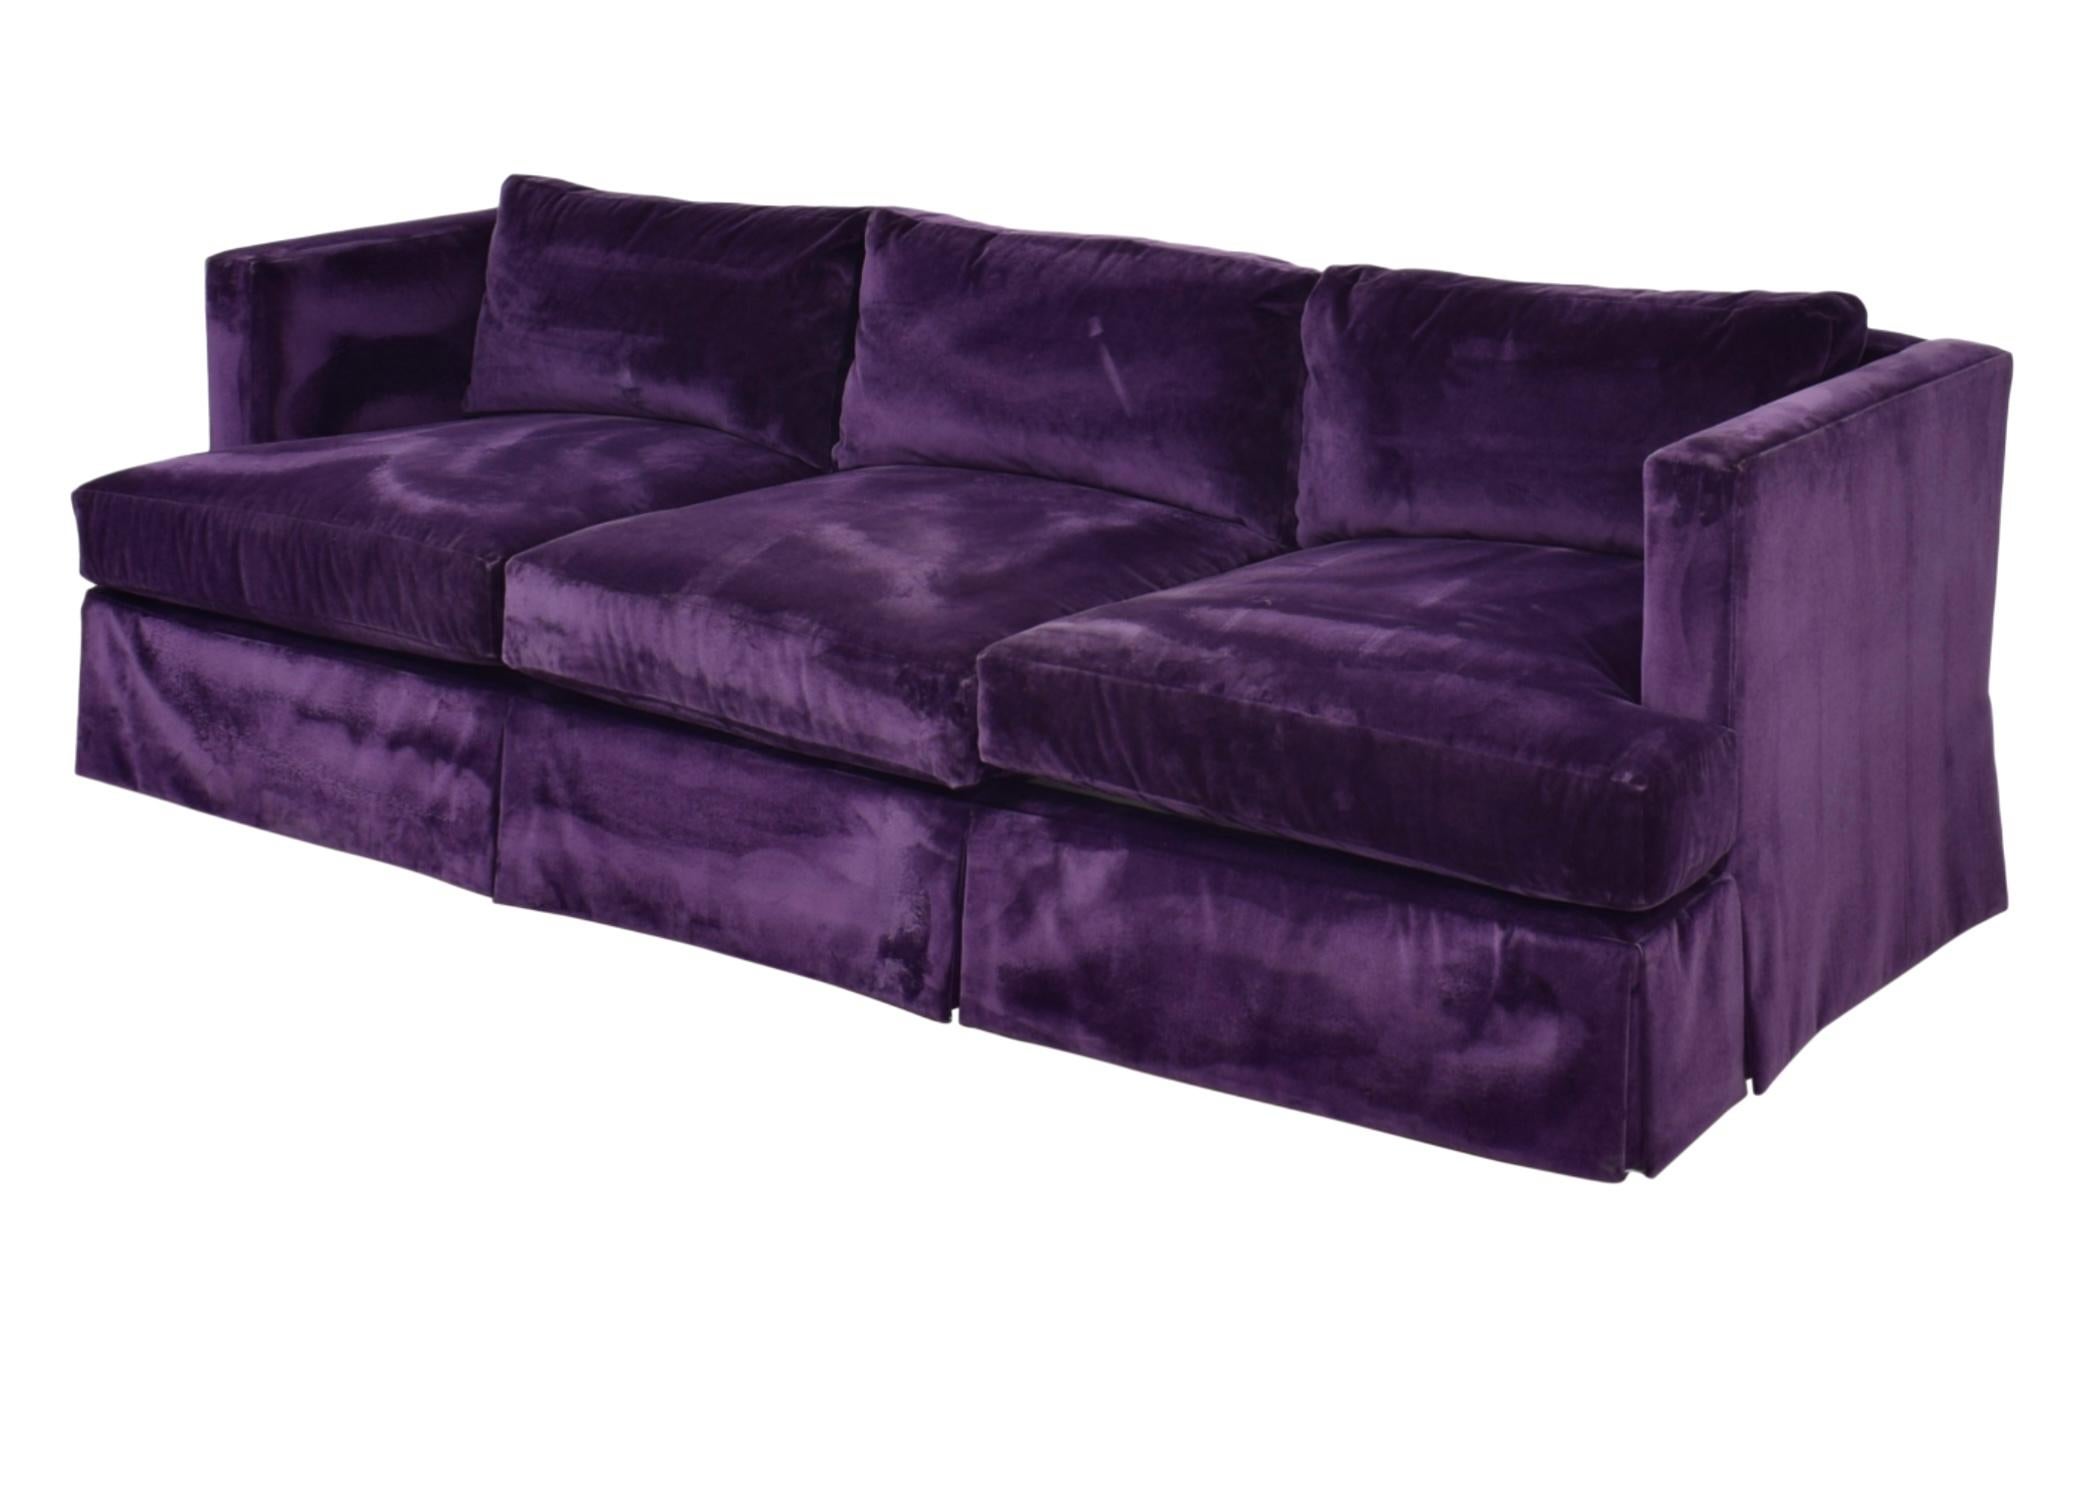 Barbara Barry for Hendredon Royal purple skirted velvet three-seat sofa.  Gorgeous lines and luxurious comfort. 